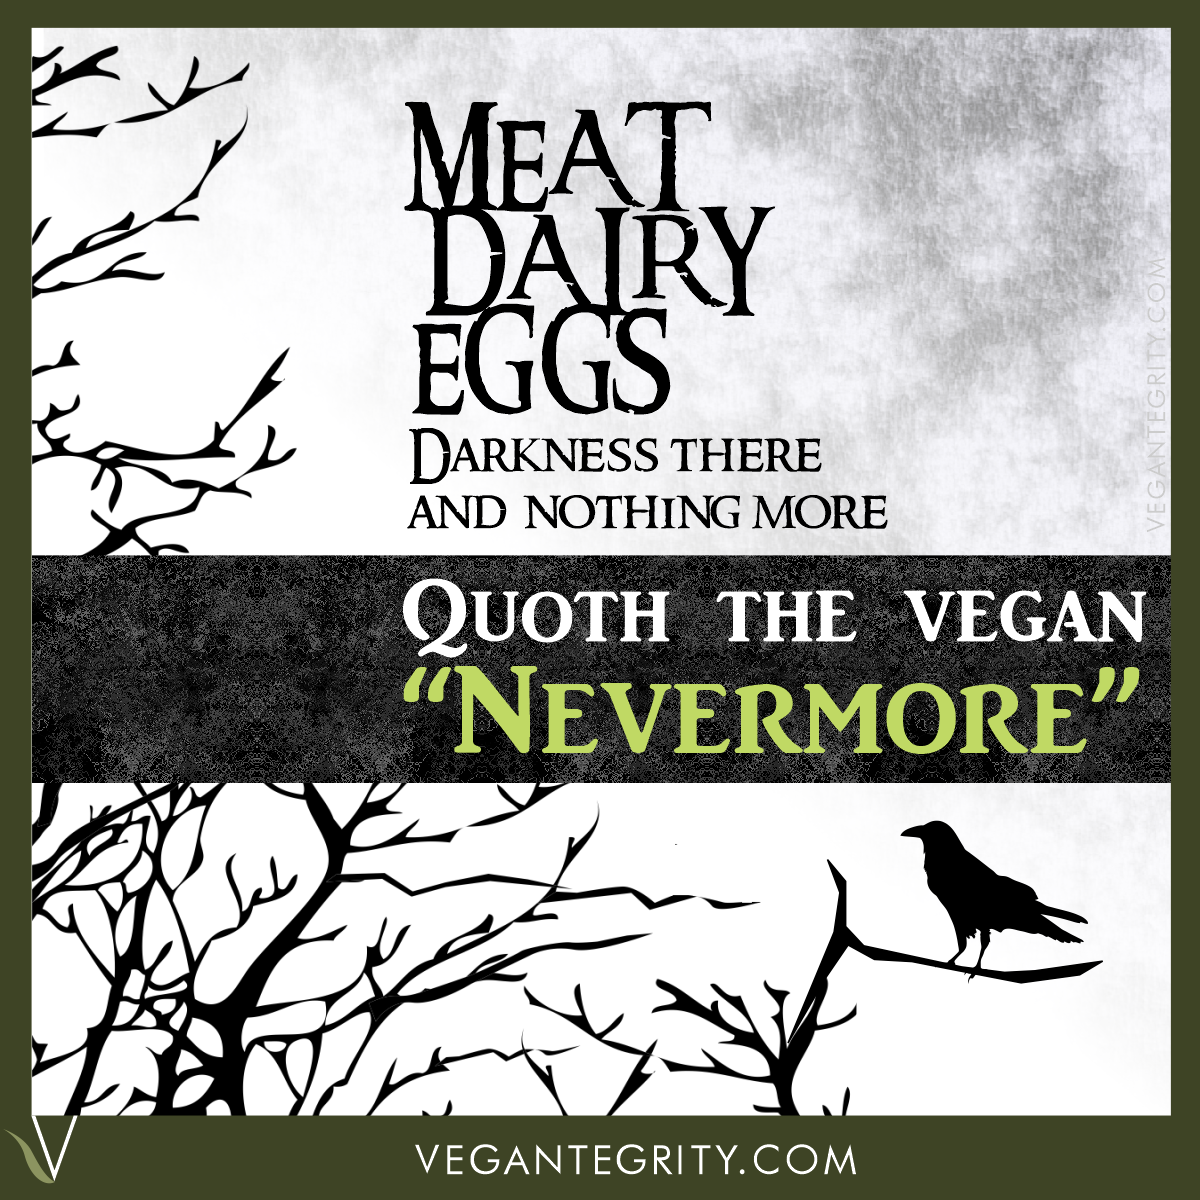 Meat, dairy and eggs - darkness there and nothing more. Quoth the vegan, "Nevermore." Black and white tree branches and raven